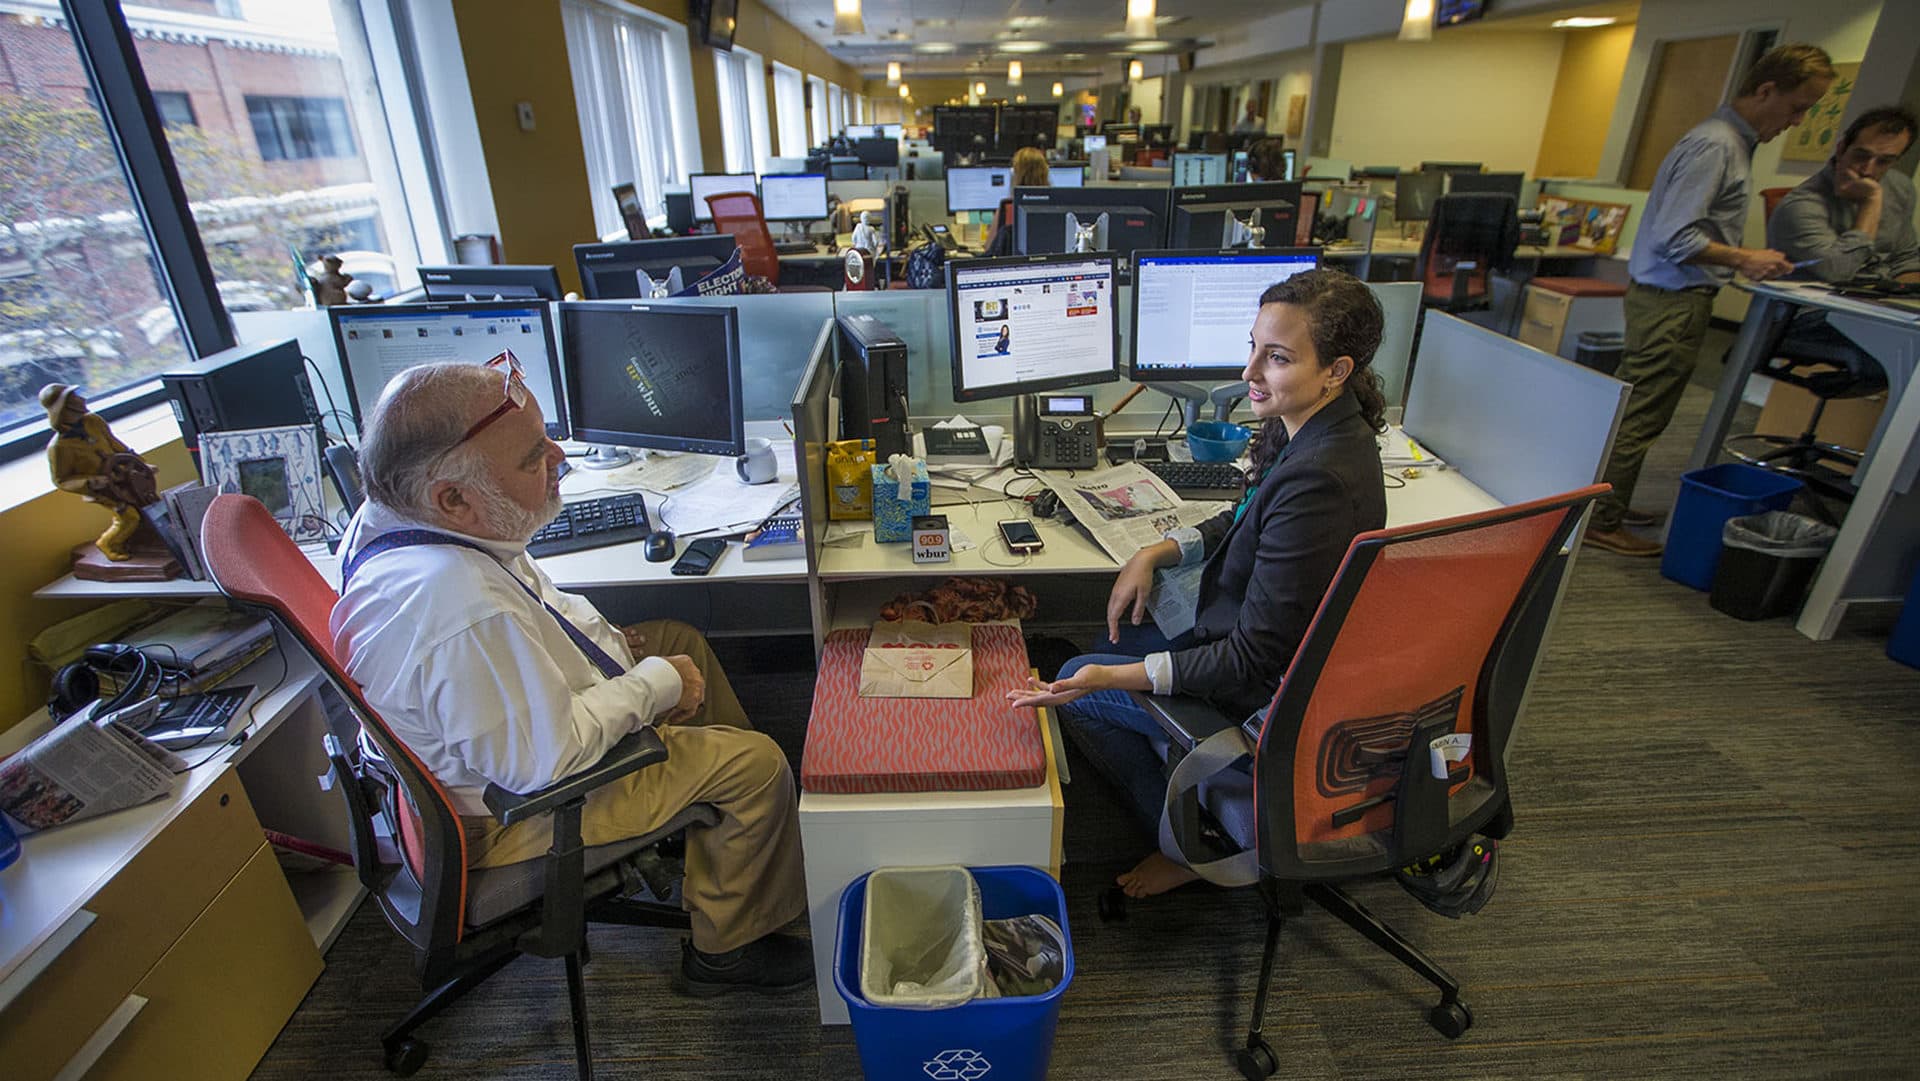 Former Morning Edition host Bob Oakes speaks with then-producer Yasmin Amer about upcoming interviews and projects. (Jesse Costa/WBUR)